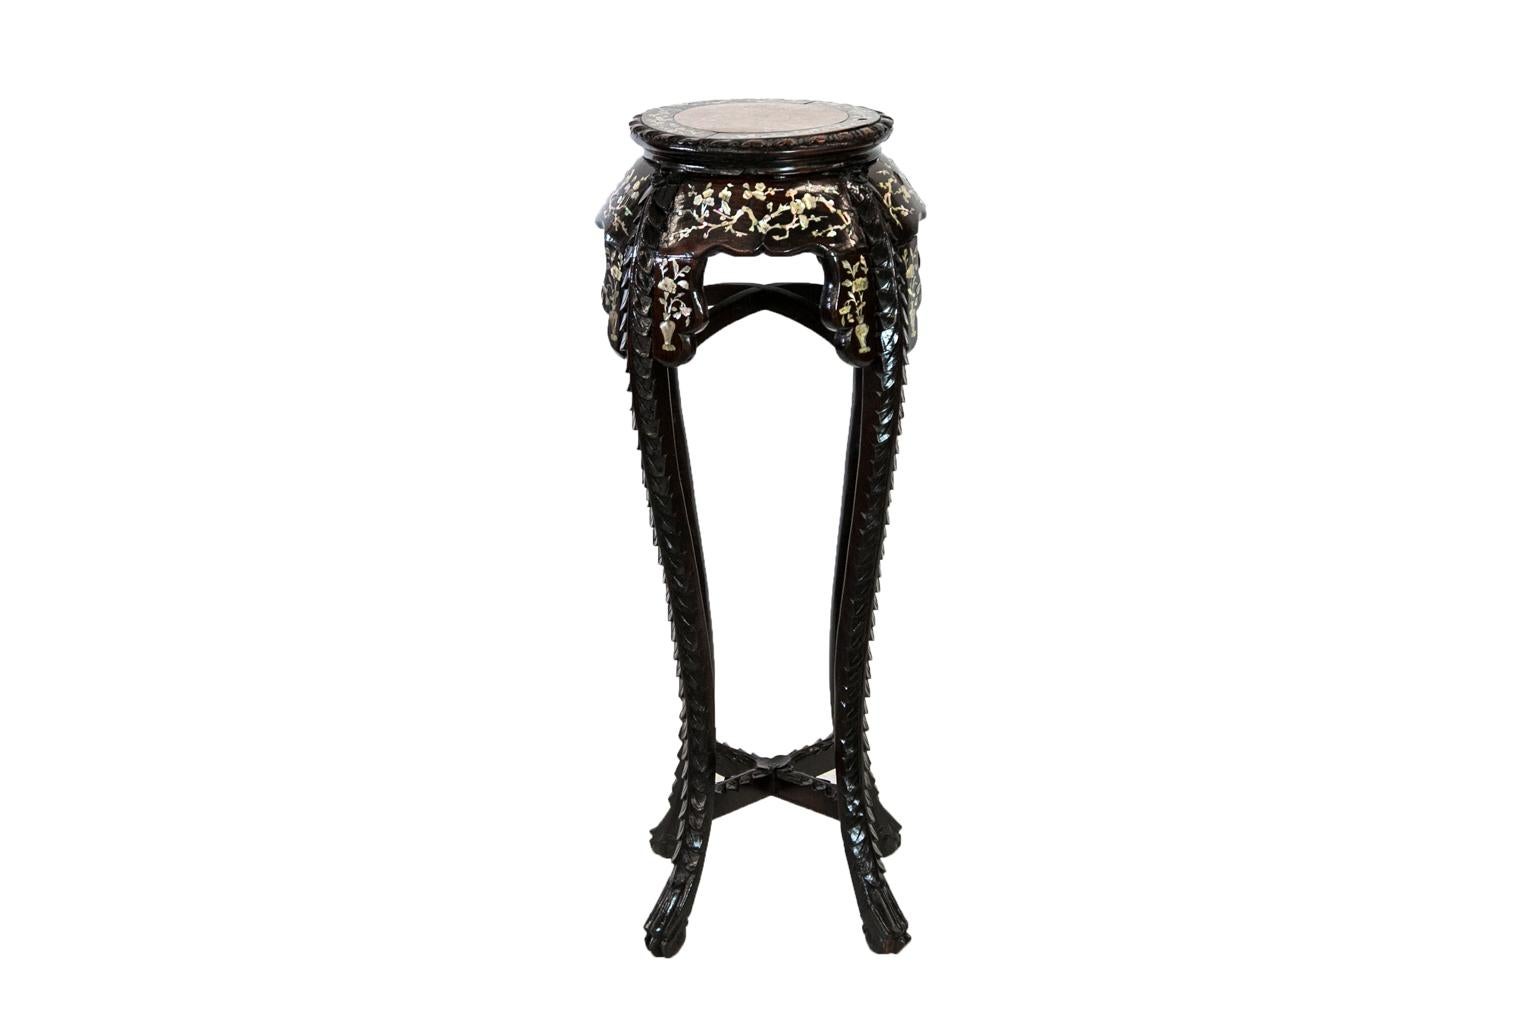 This Chinese rosewood inlaid stand is profusely inlaid with mother of pearl vines, flowers, limbs, and birds. The shaped leg supports are inlaid with mother of pearl vases and flowers. The top has an insert of shrimp marble and a gadrooned top edge.